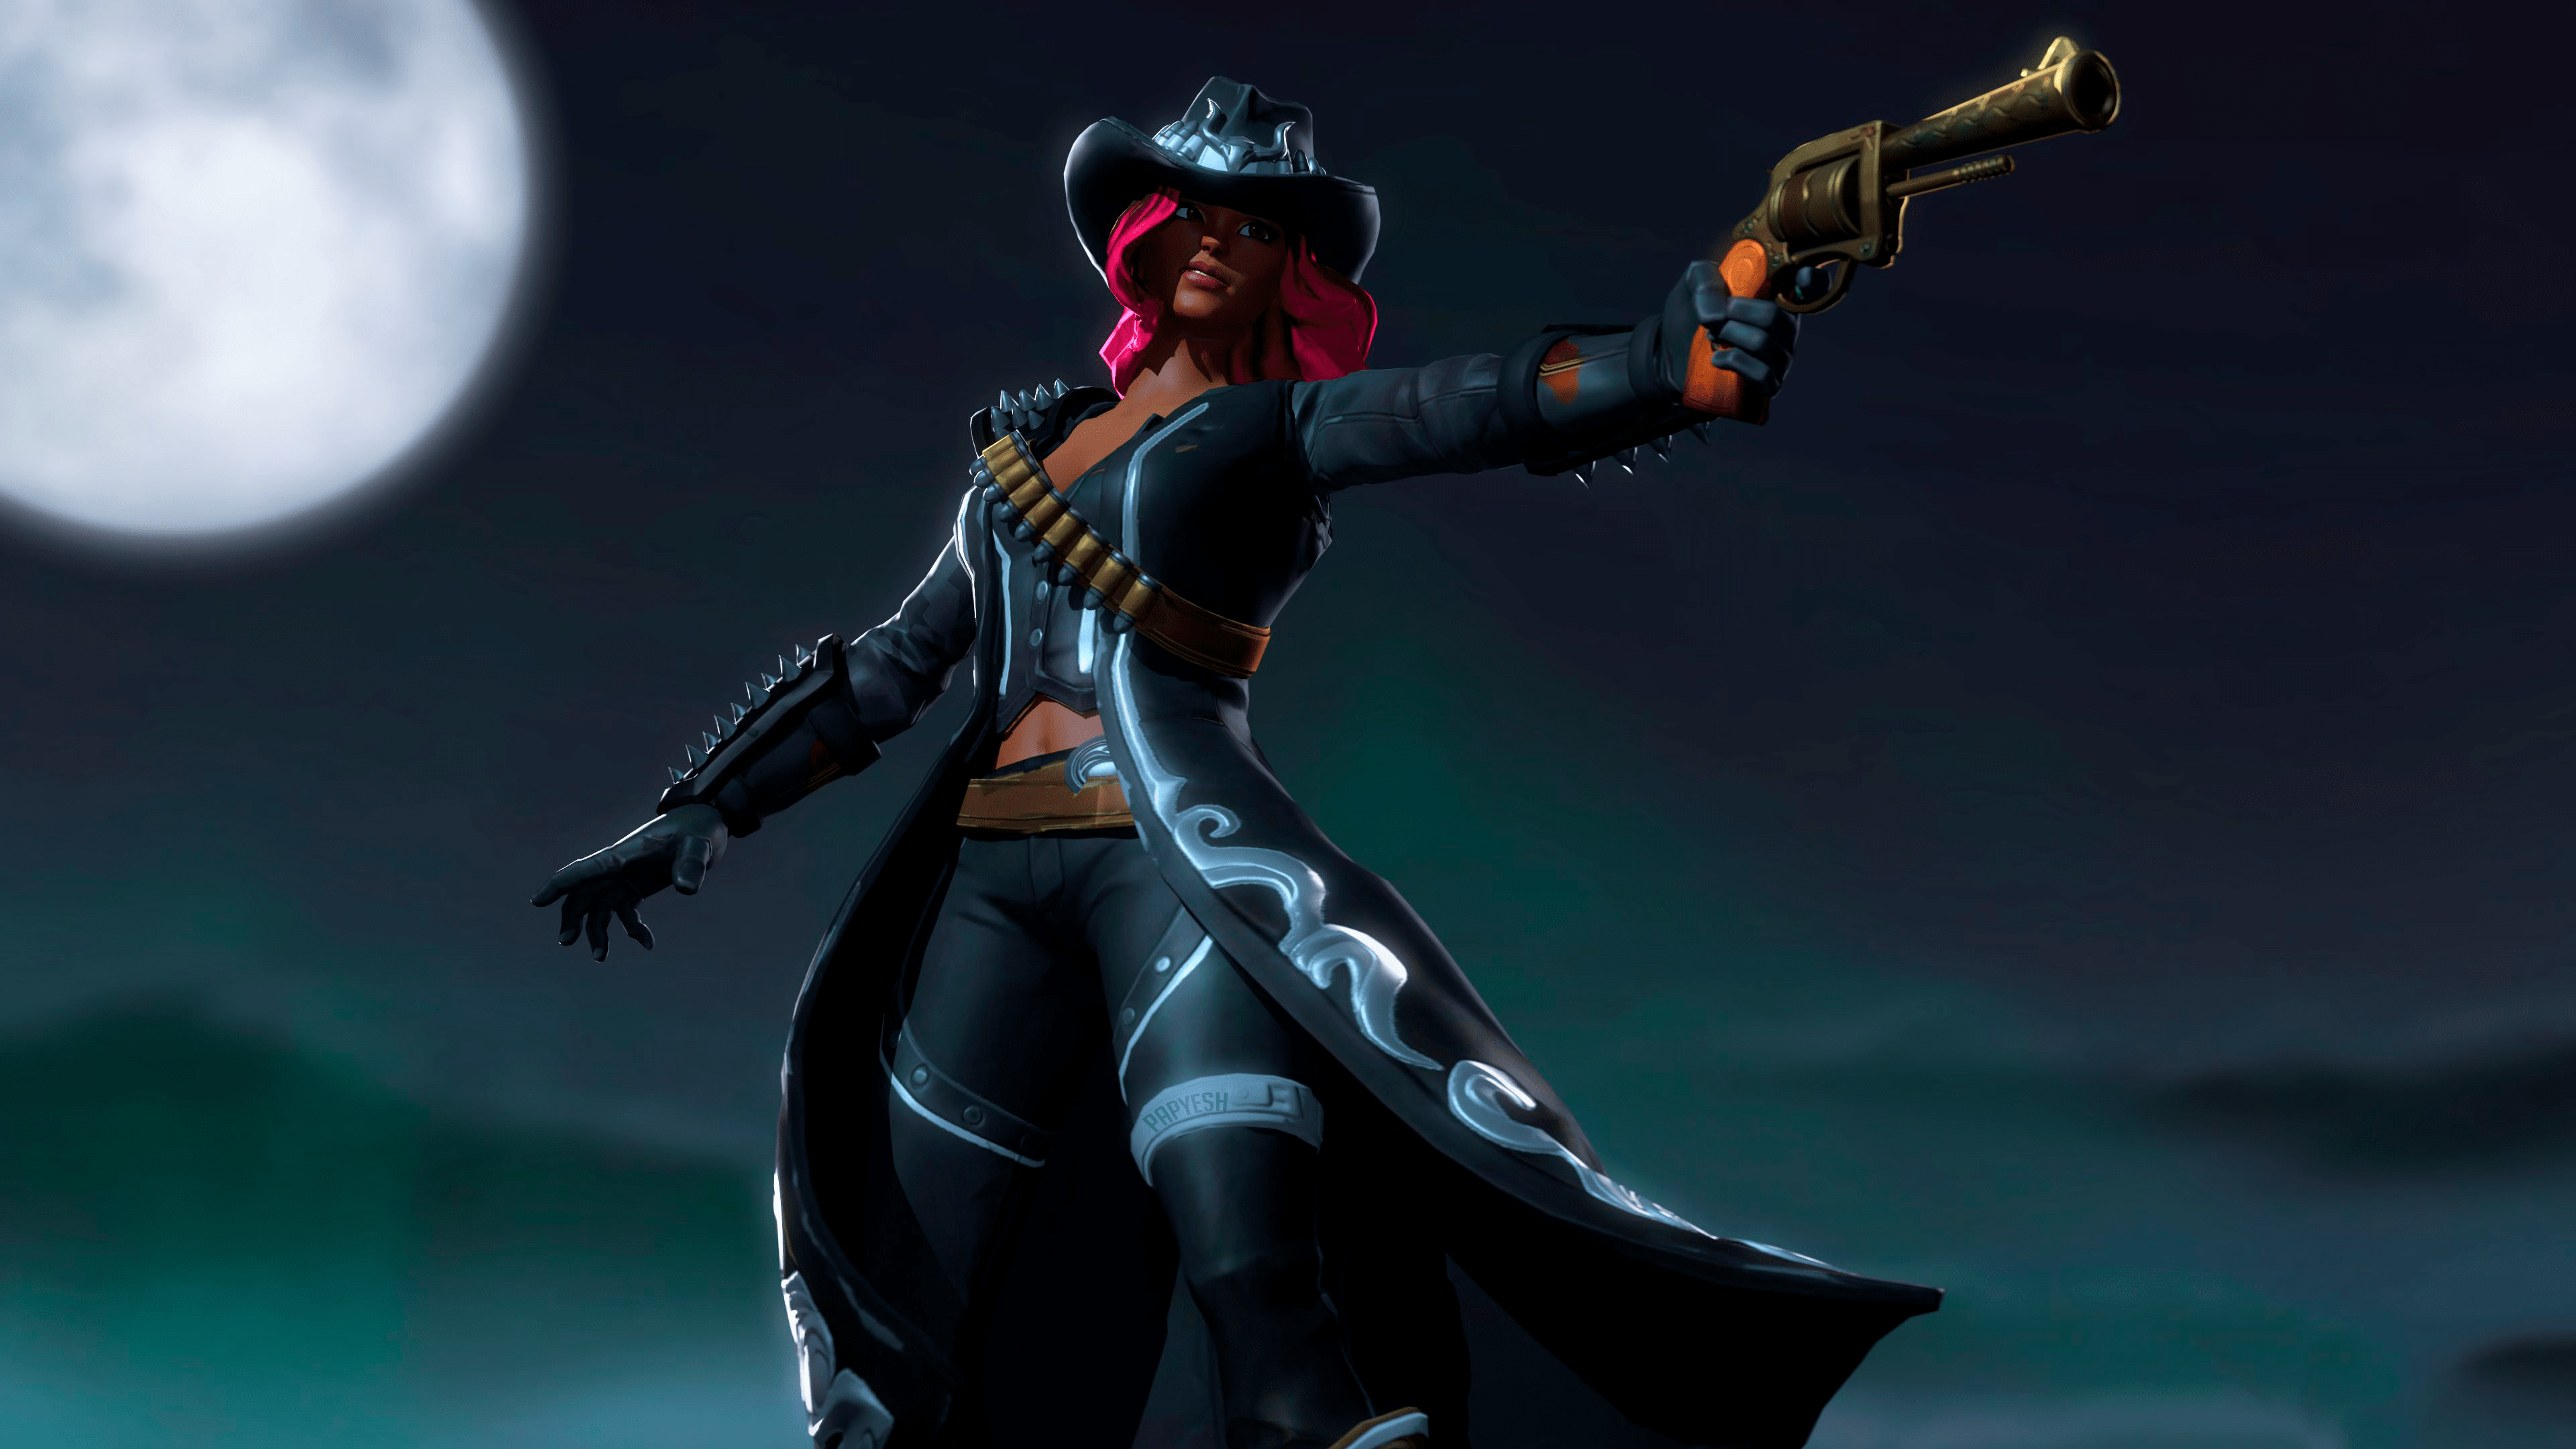 Calamity Wallpaper Fortnite Season 6 All Stages - Calamity Wallpaper Fortnite - HD Wallpaper 